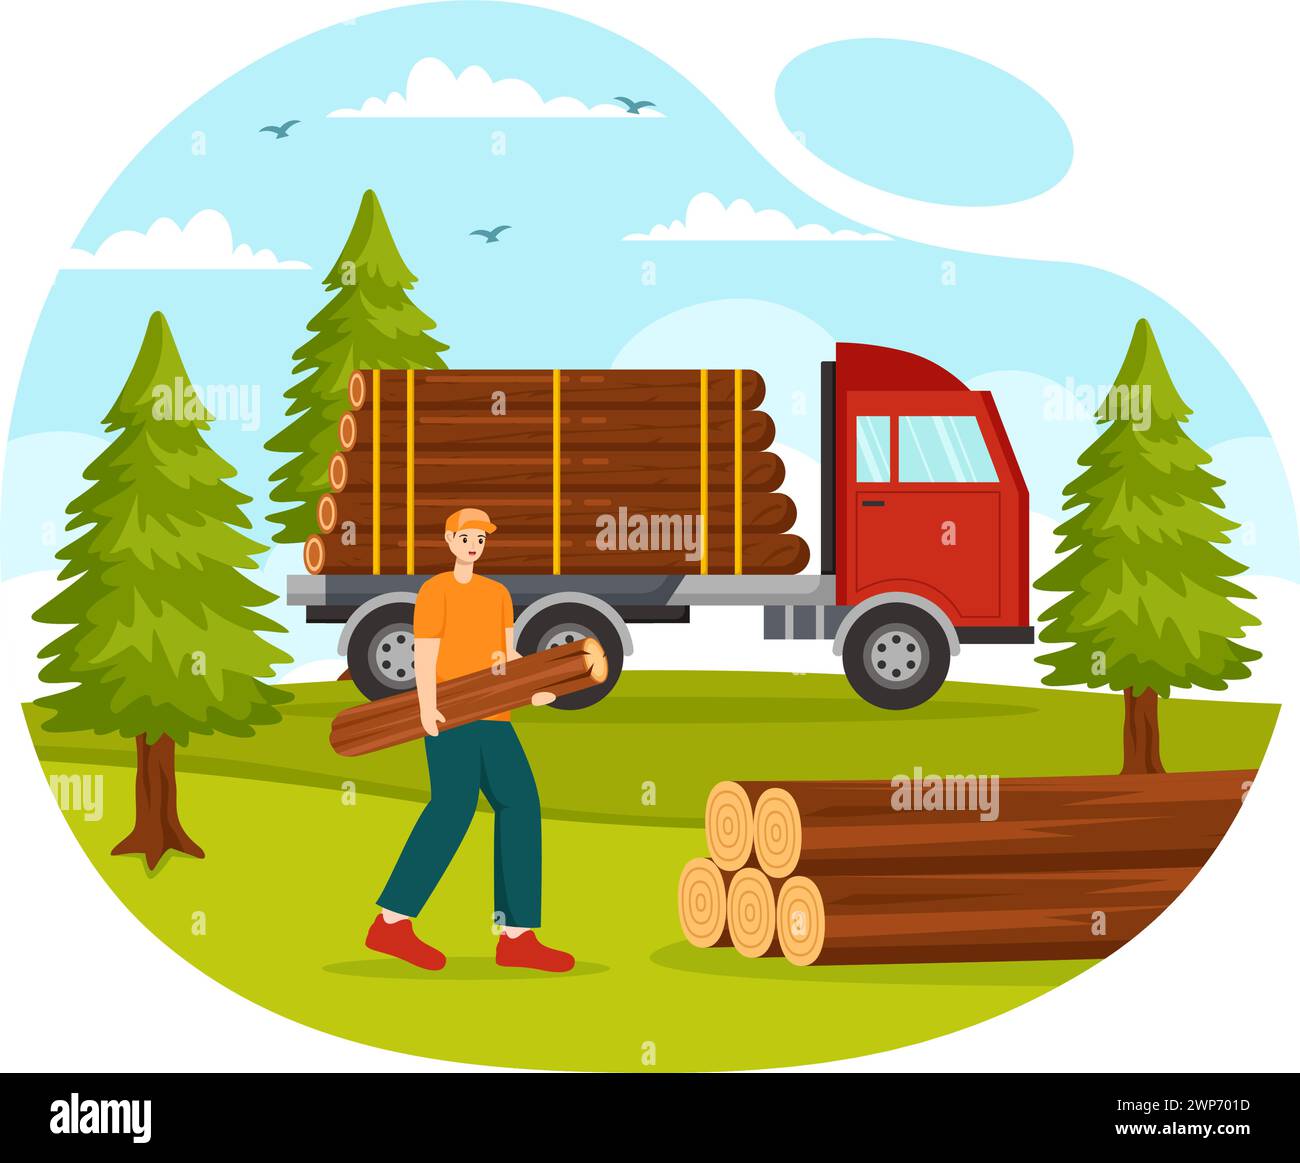 Timber Vector Illustration with Man Chopping Wood and Tree with Lumberjack Work Equipment Machinery or Chainsaw at Forest in Flat Cartoon Background Stock Vector